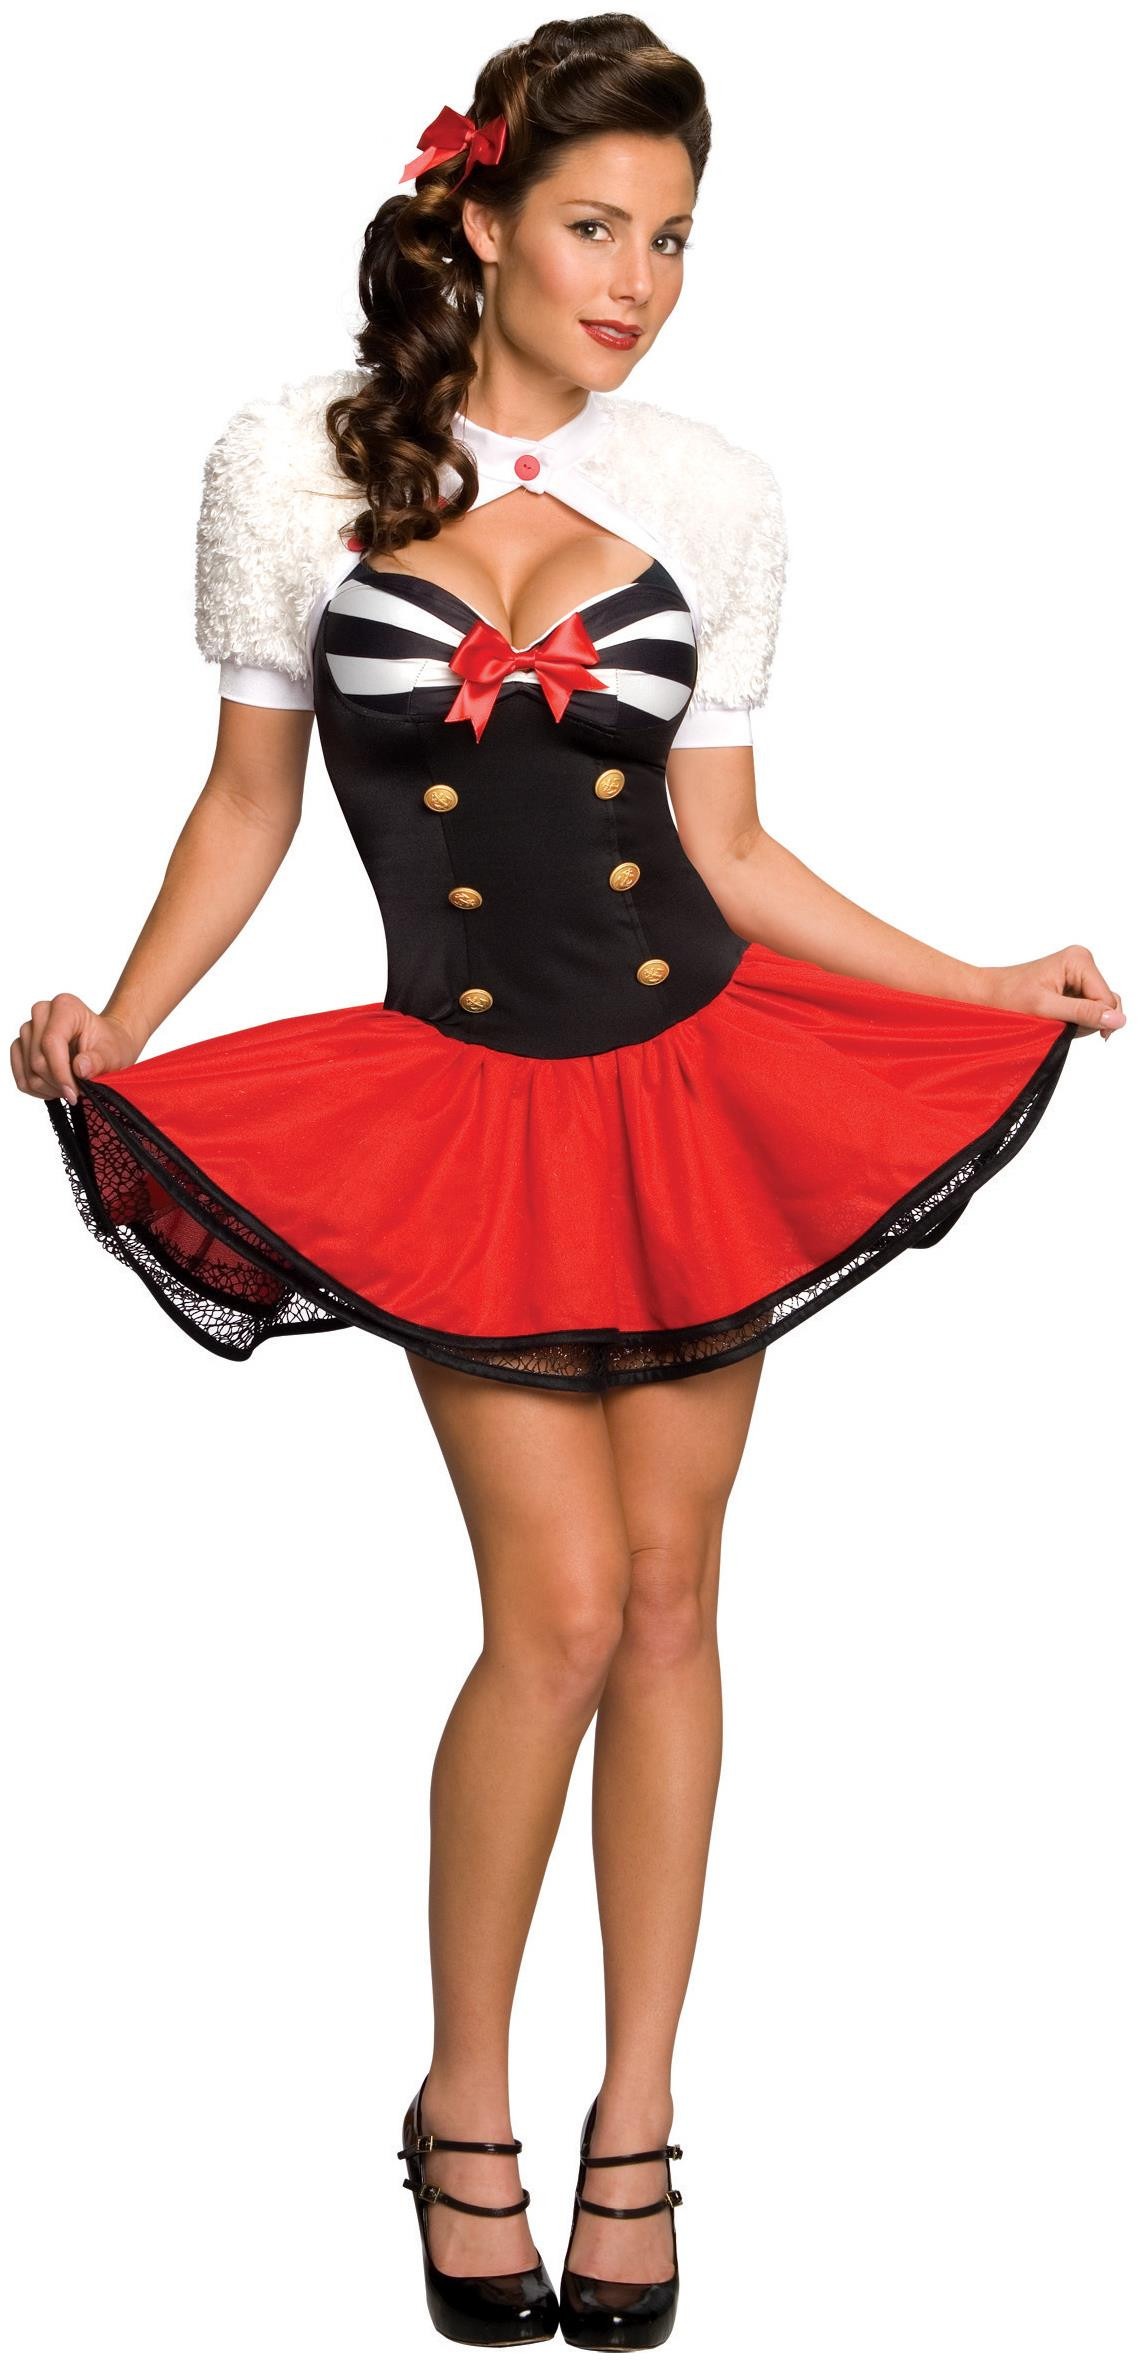 Pins Outfit
 Secret Wishes Naval Pinup Adult Costume PartyBell